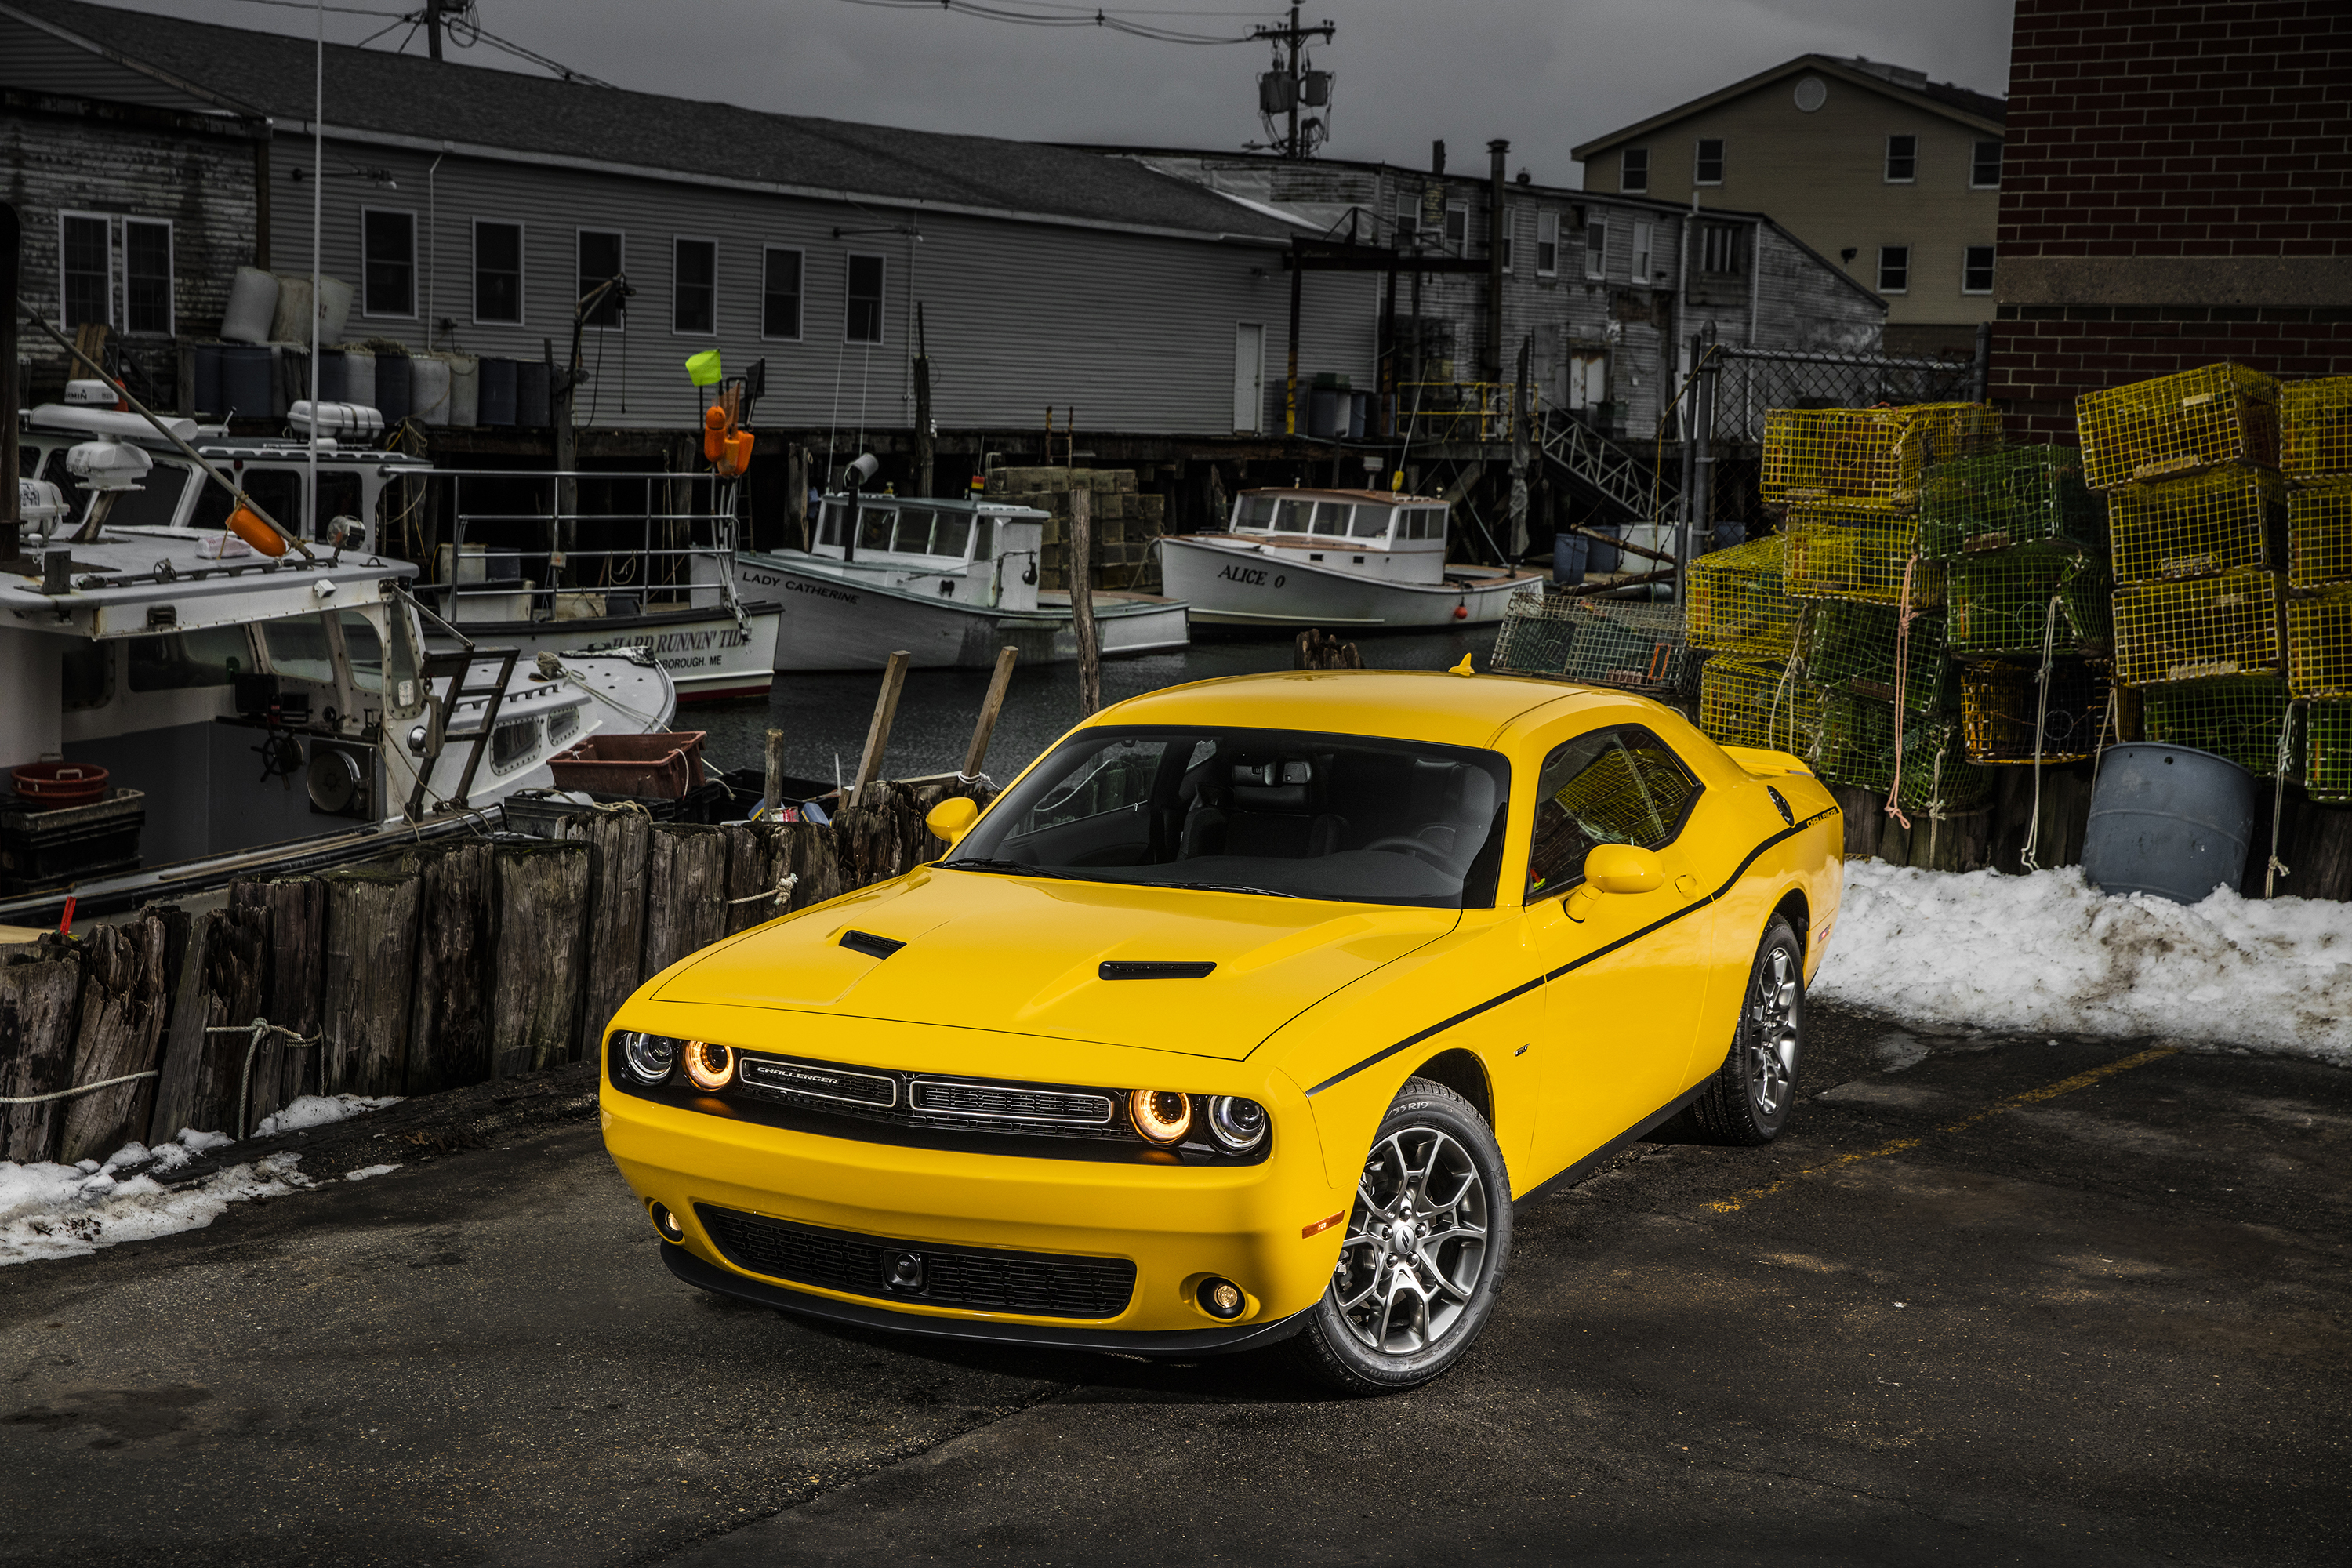 Dodge Challenger Dodge Muscle Car Car Vehicle Yellow Car Fishing Boat 3000x2000